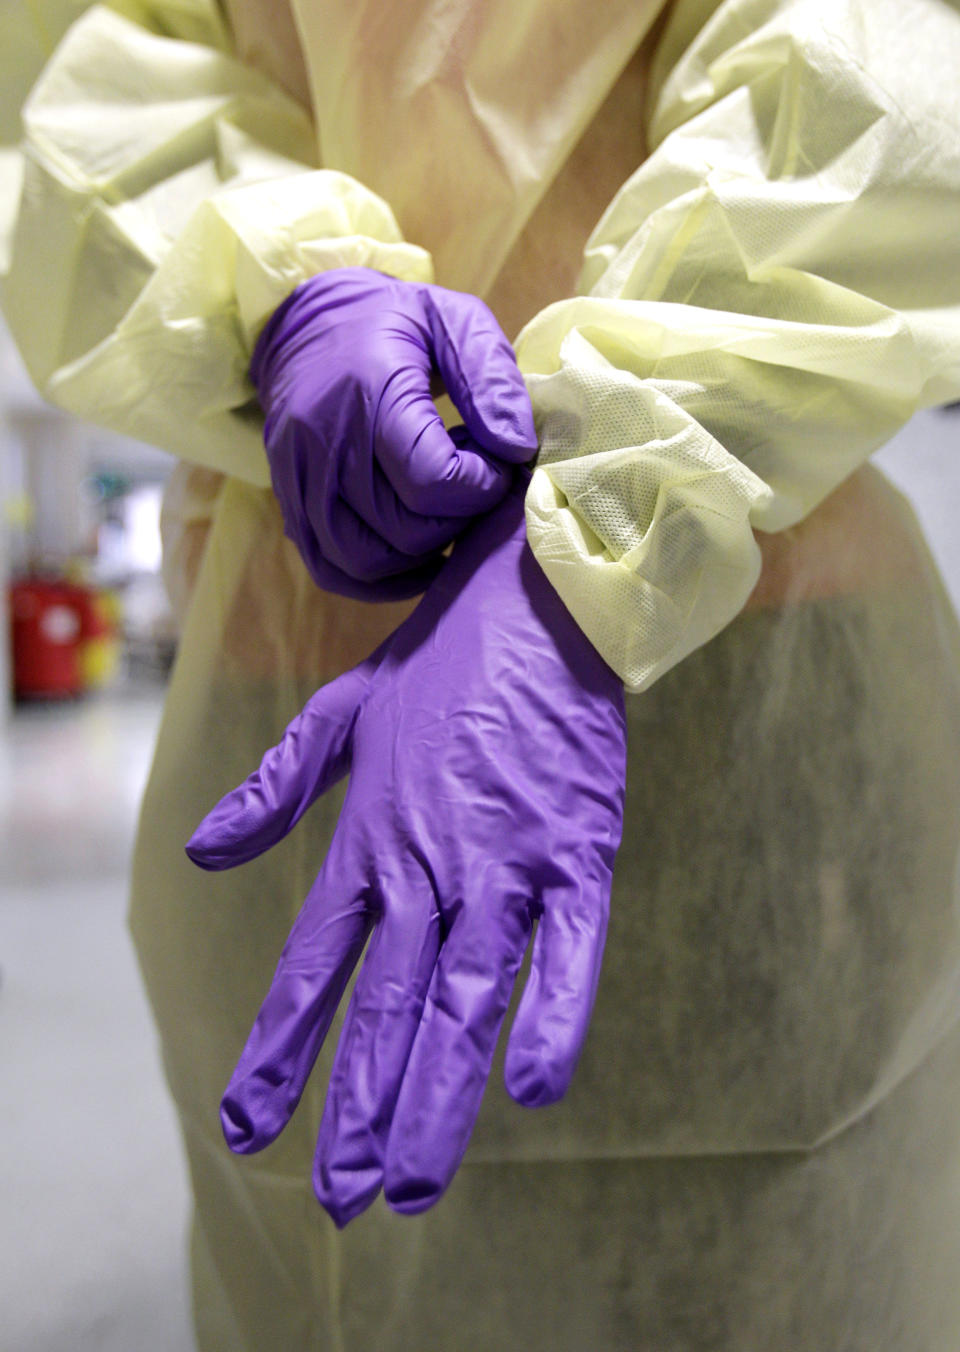 An ICU nurse puts on gloves before entering a patient's room. (Photo: AP Photo/Rob Carr)